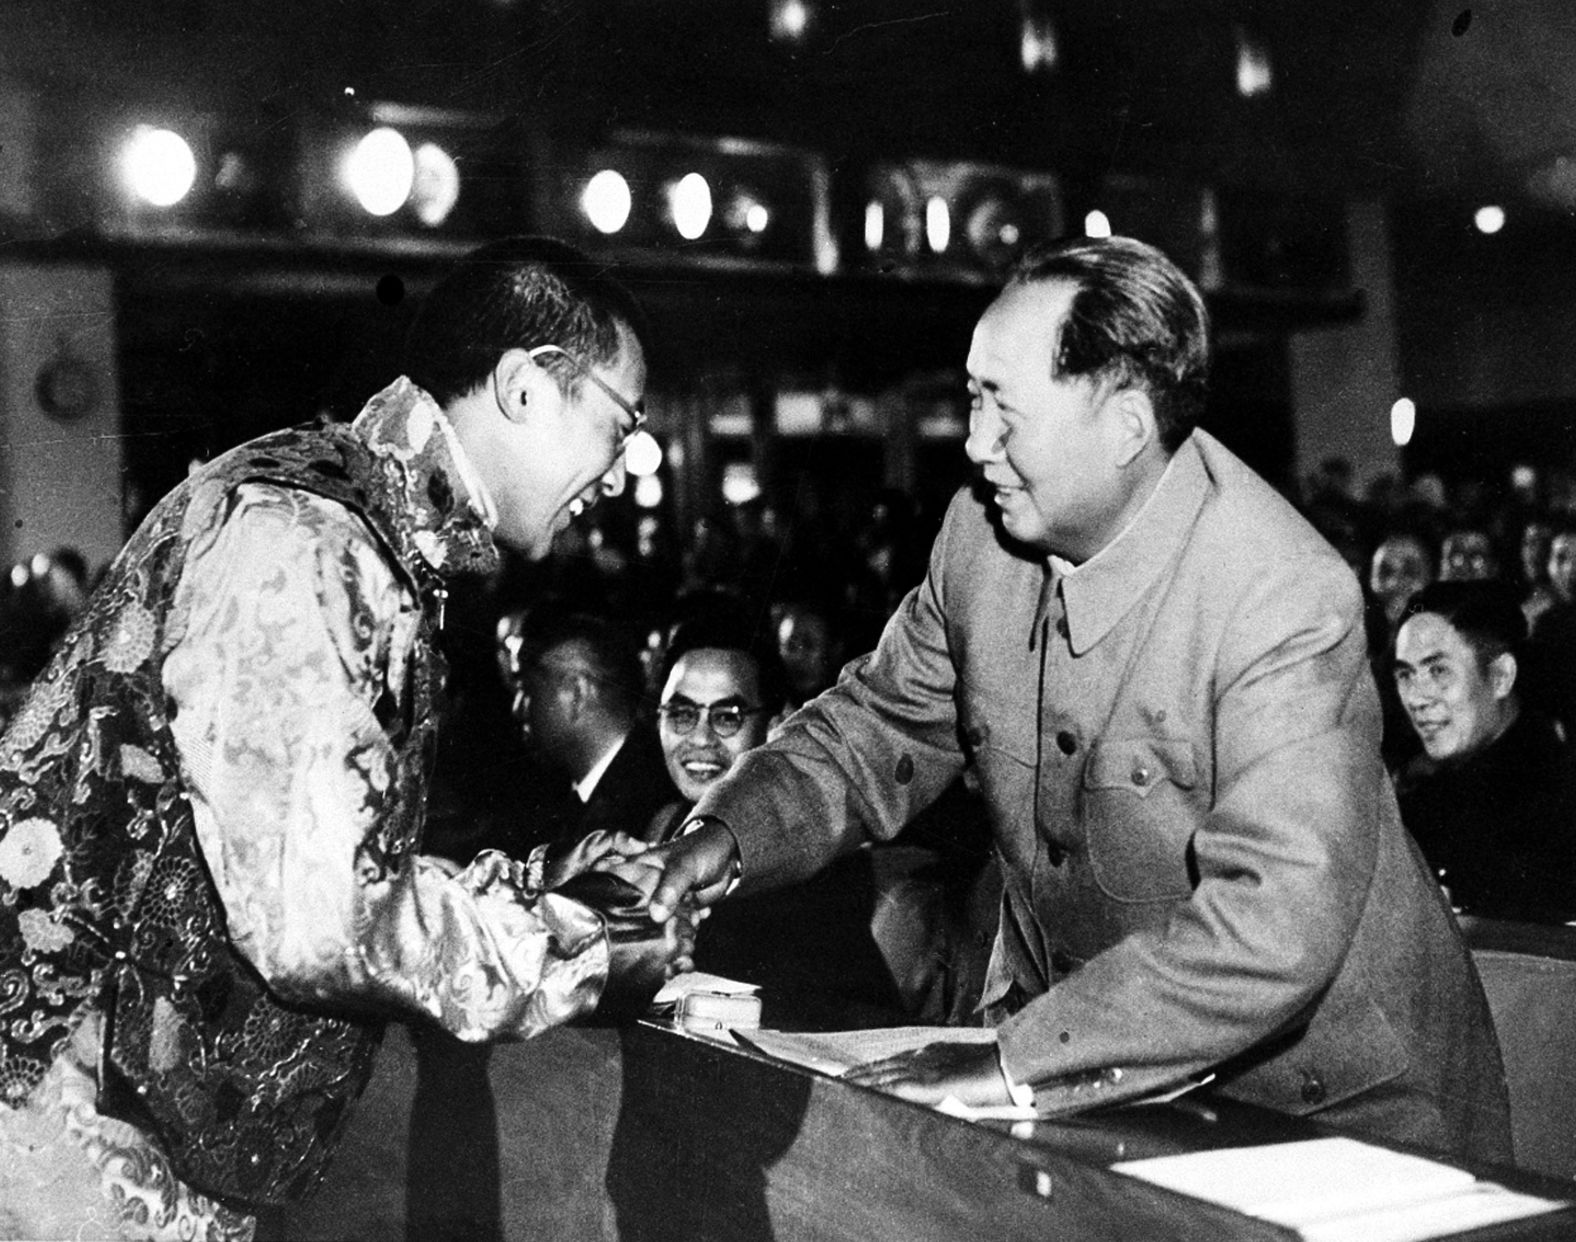 The Dalai Lama, the Tibetan spiritual leader, shakes hands with Mao in Beijing in 1954. Five years later, the Dalai Lama fled to India after the failed Tibetan uprising against Chinese rule.